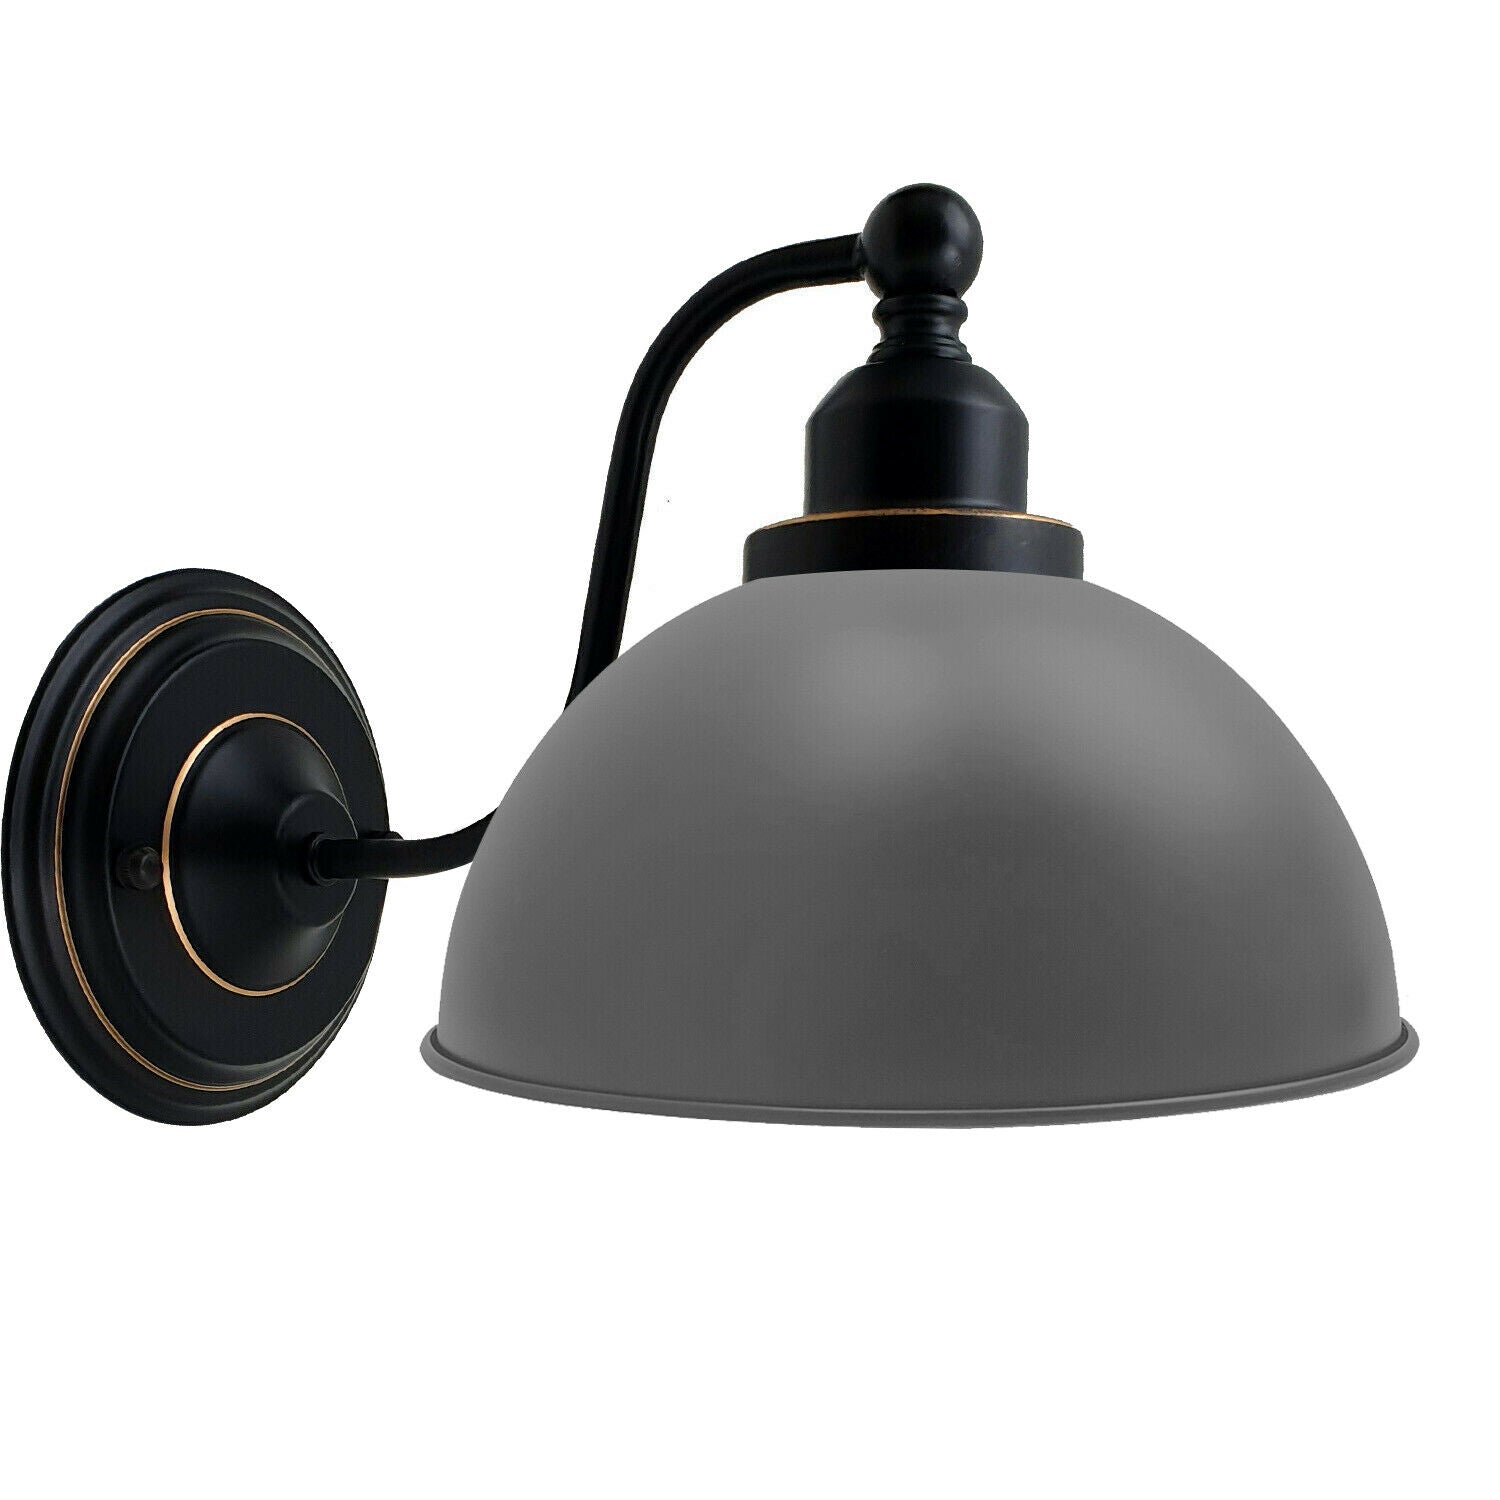 Retro industrial suspended wall lamp